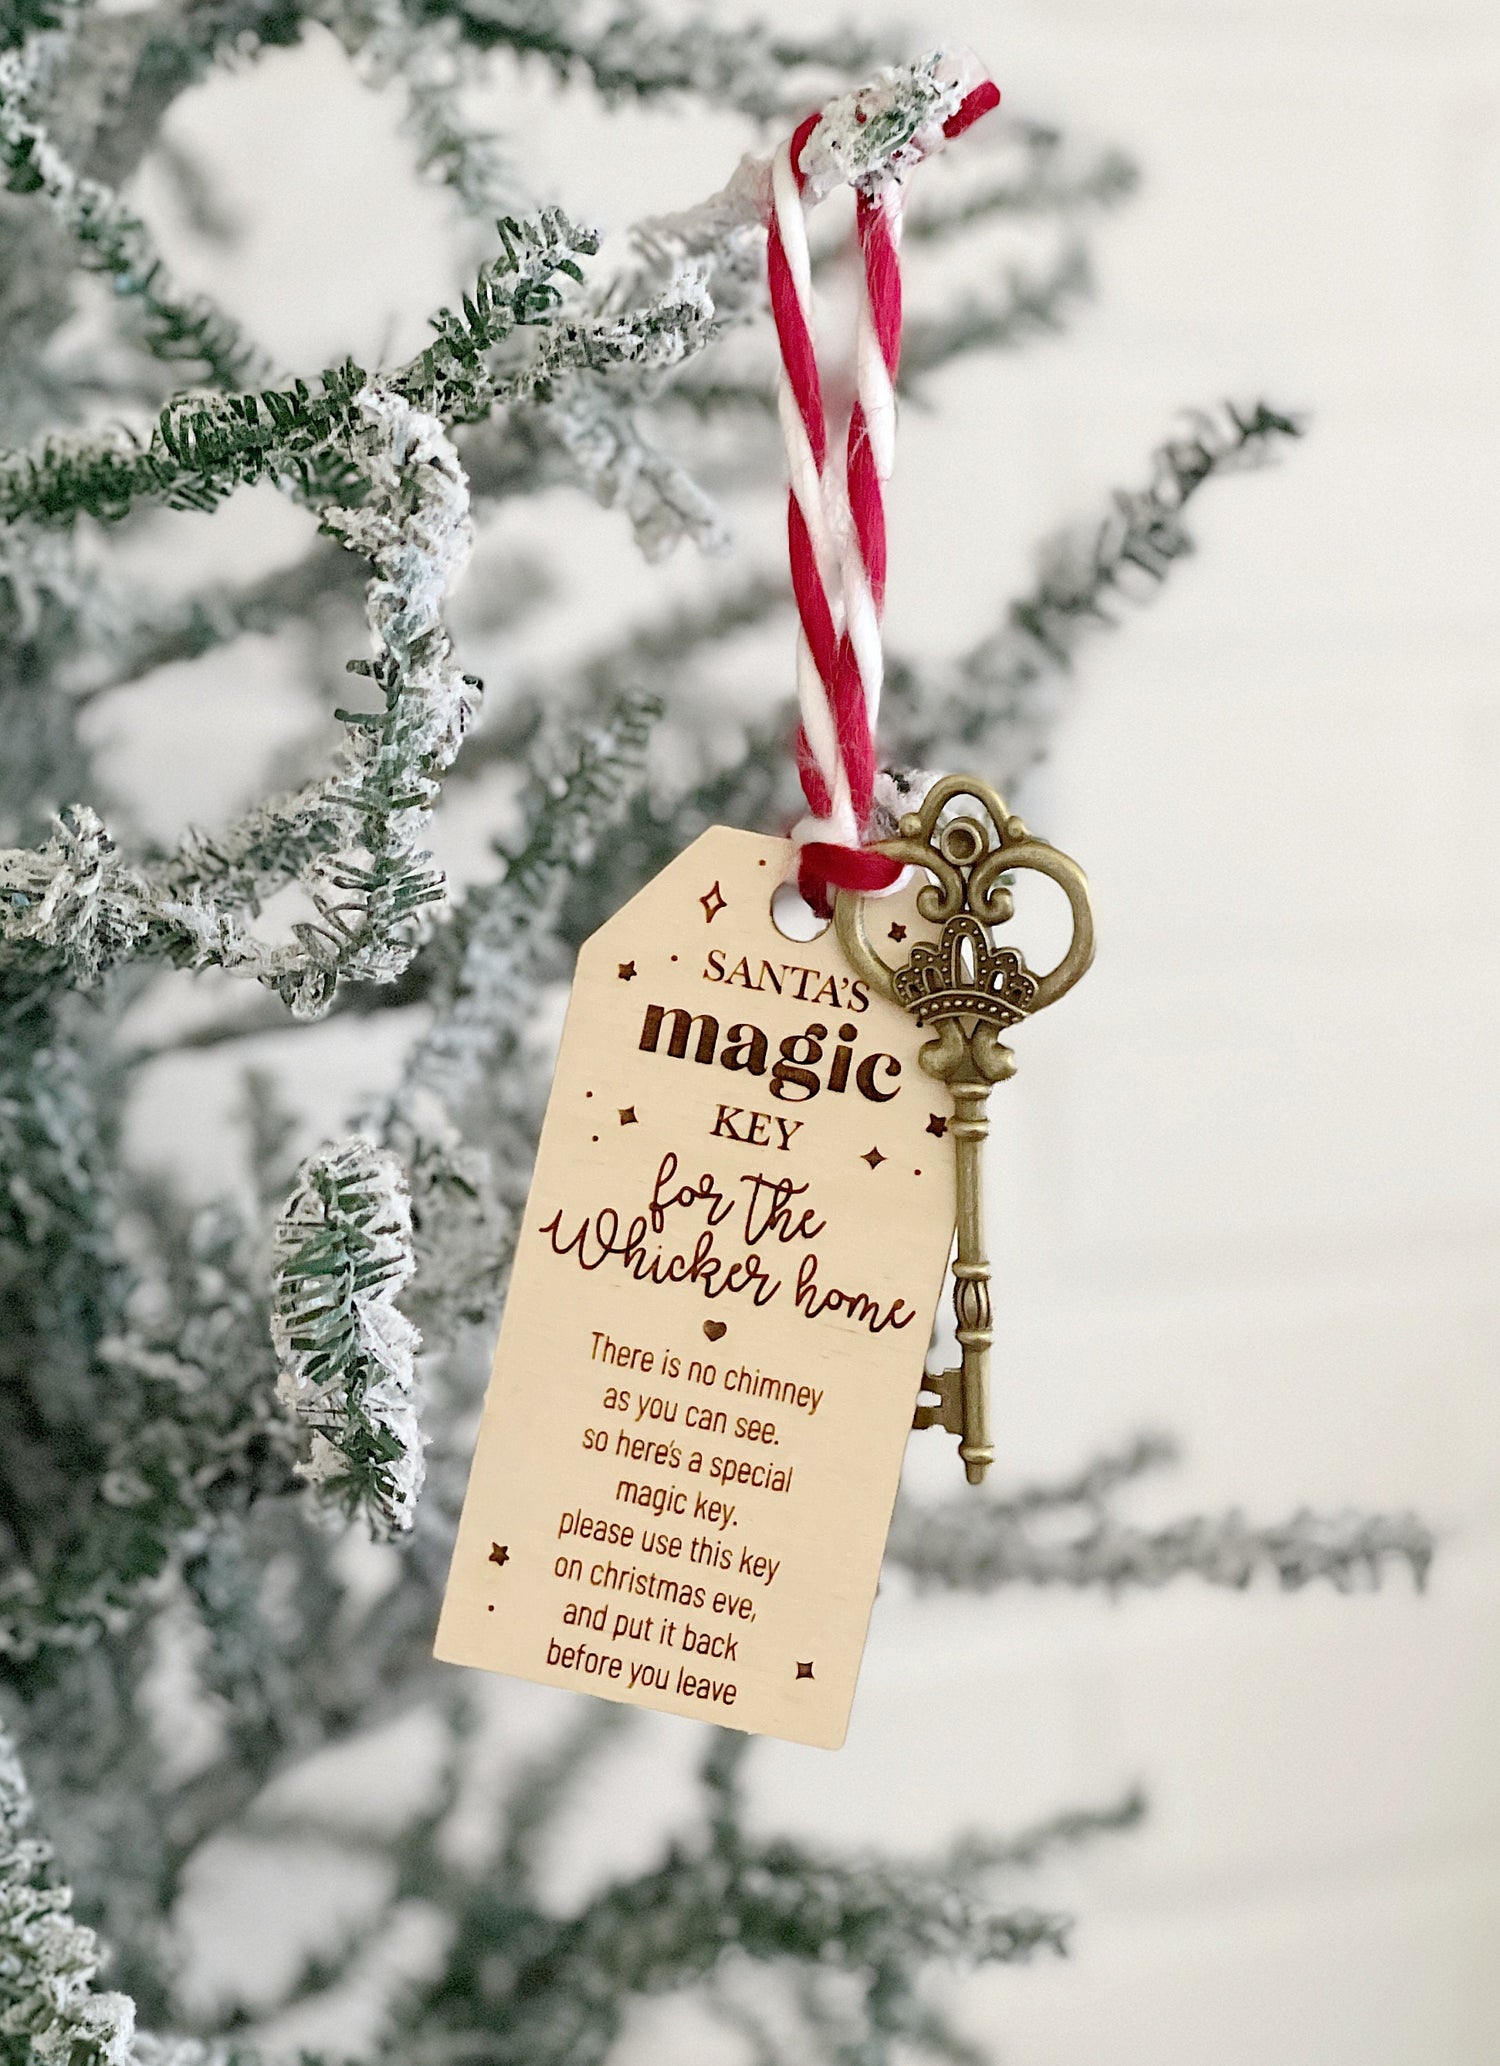 Help Santa get into your home on Christmas Eve with a magic key